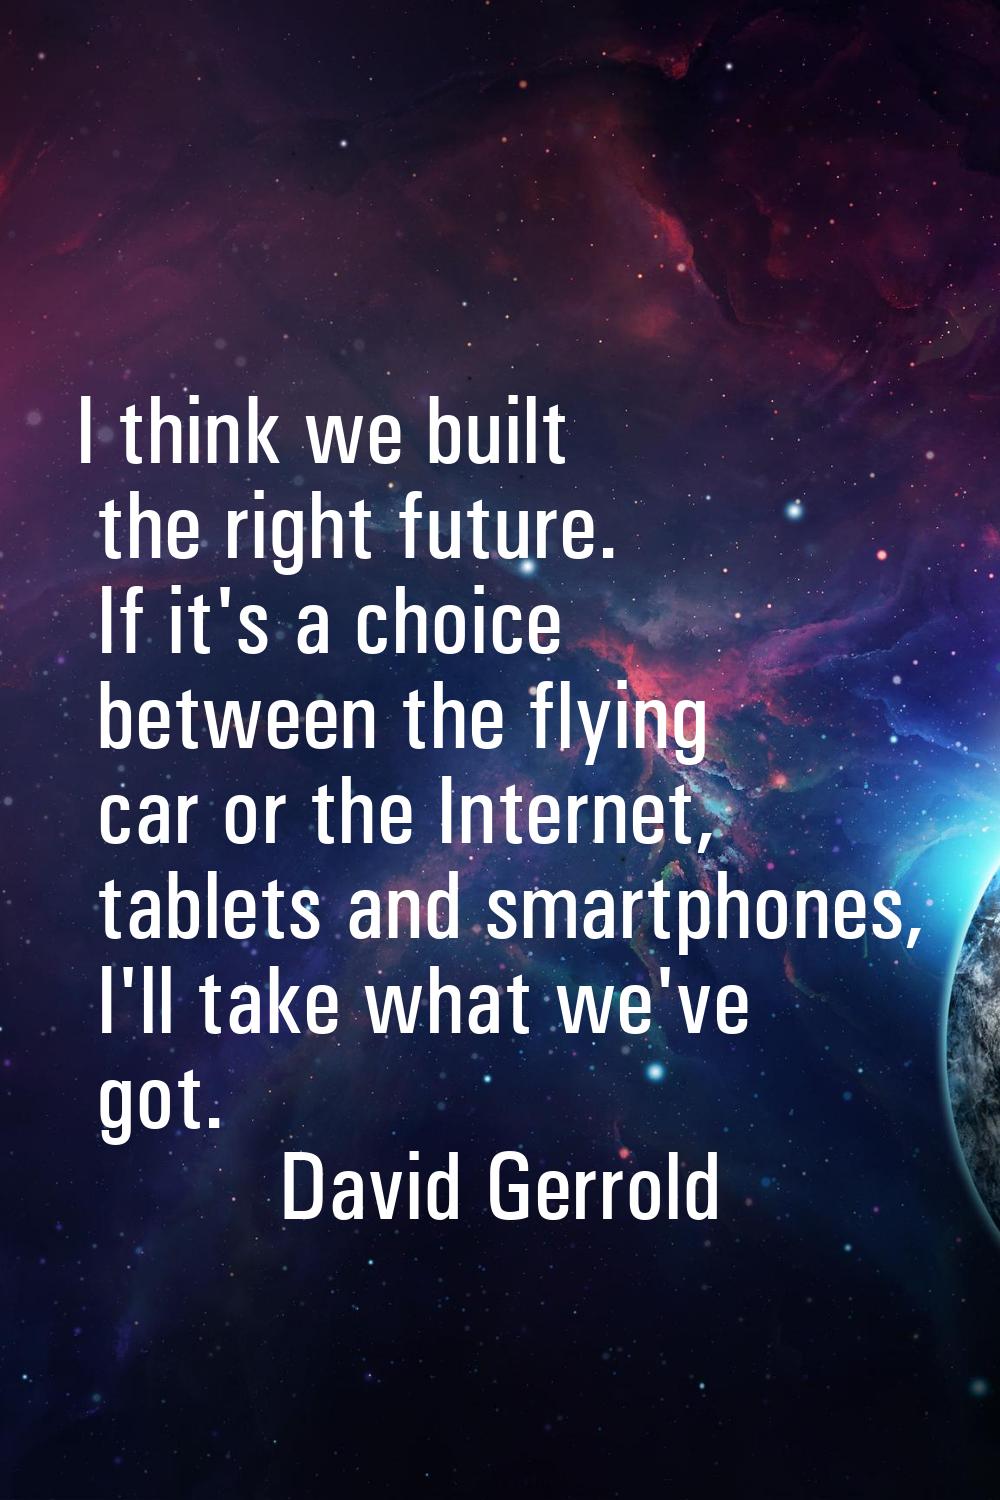 I think we built the right future. If it's a choice between the flying car or the Internet, tablets